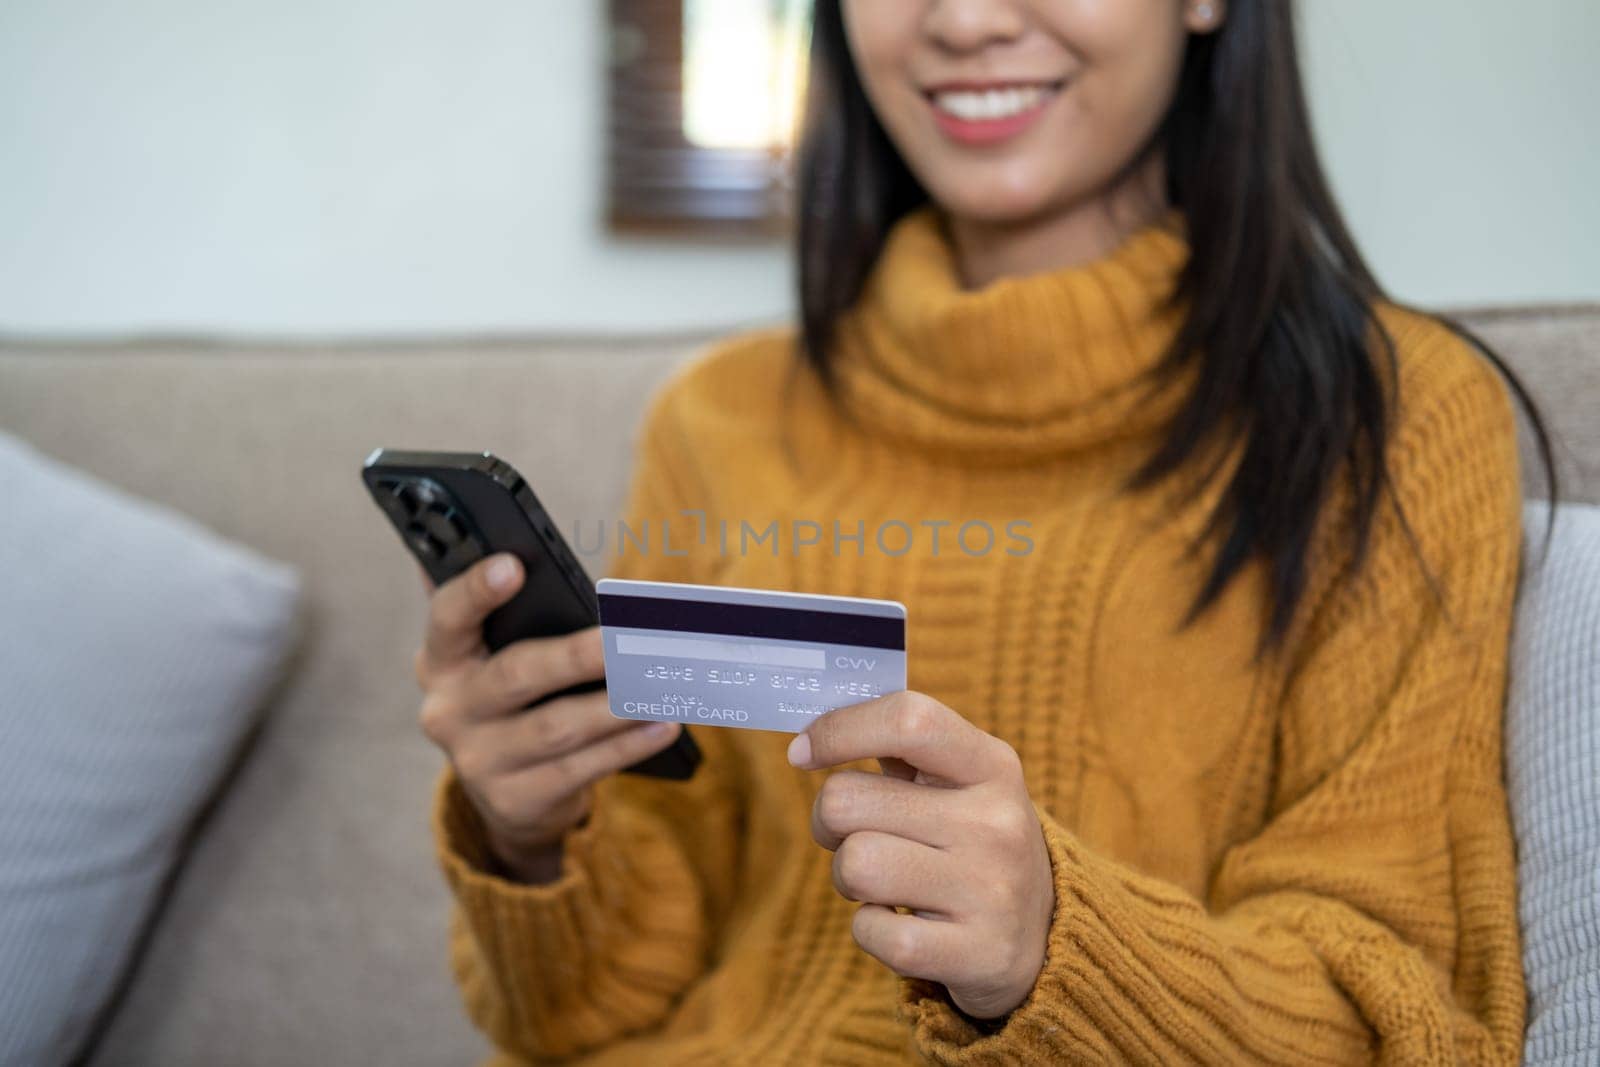 Happy smart young woman Asian using smartphone for shopping, mobile shopping, beautiful woman doing online purchases, shopping online. High quality photo